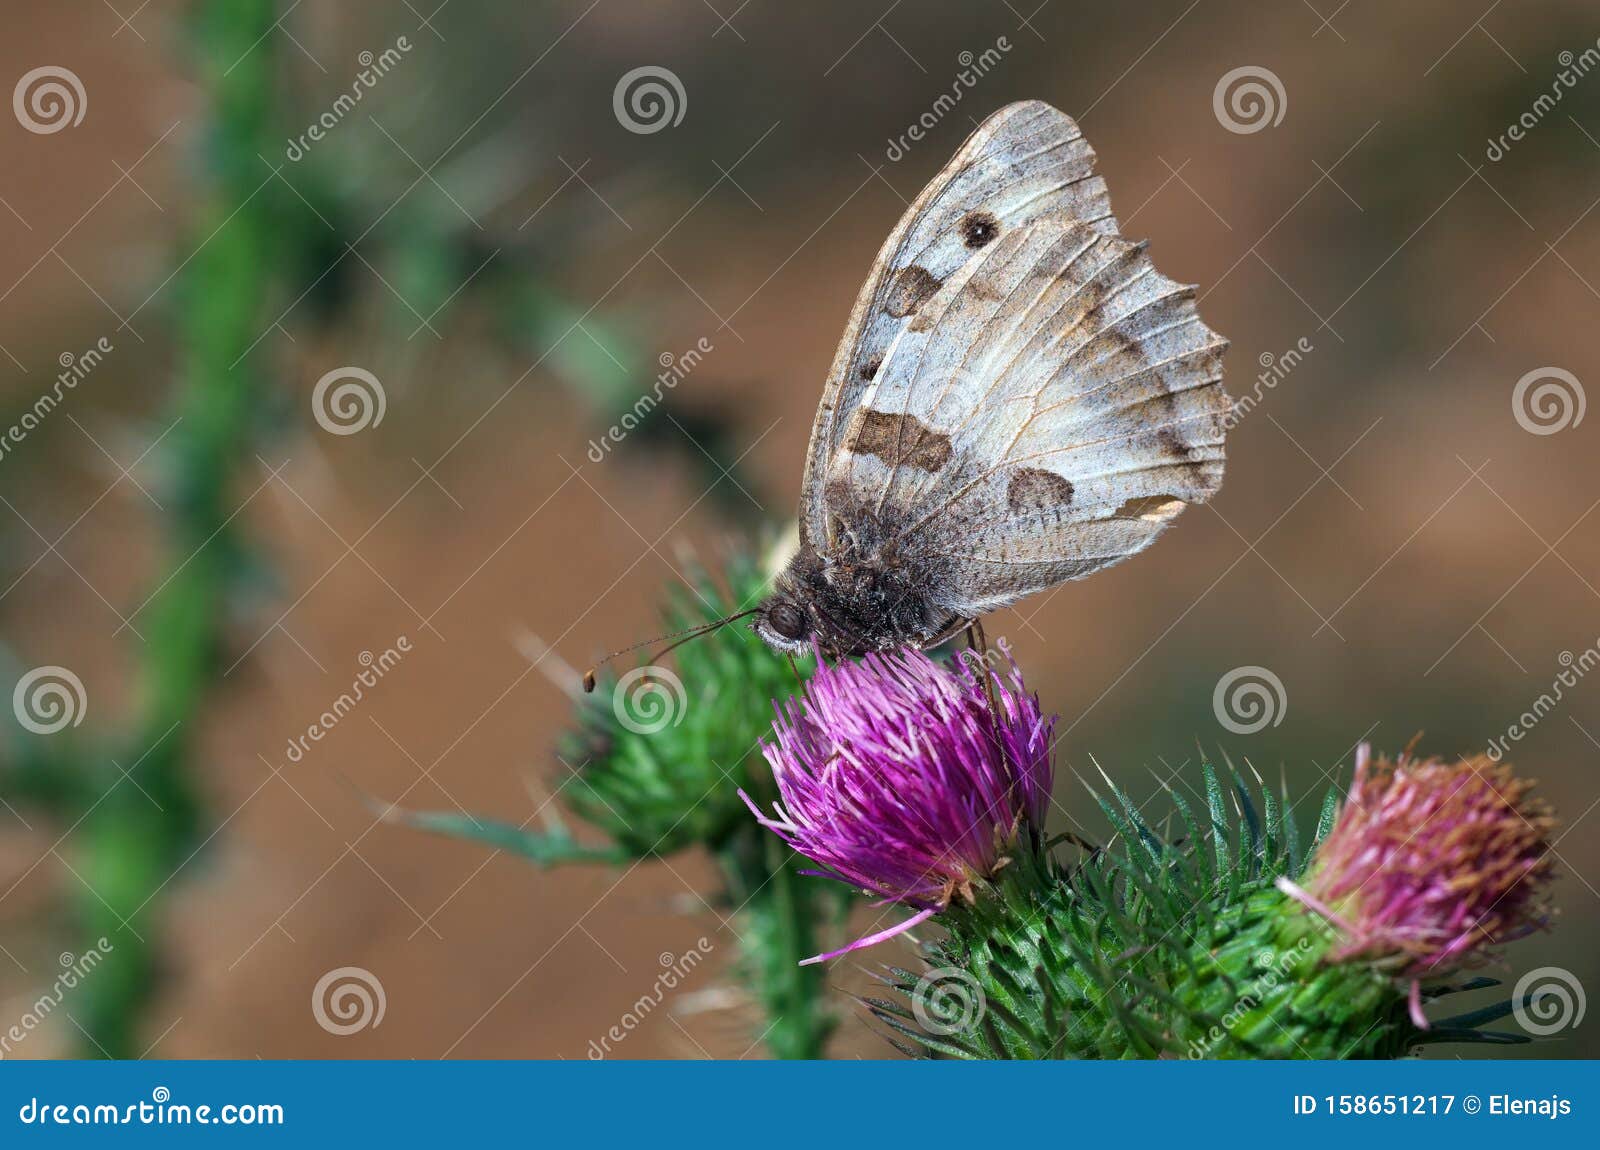 hipparchia briseis - butterfly, macrophotography - butterflies on a thistle